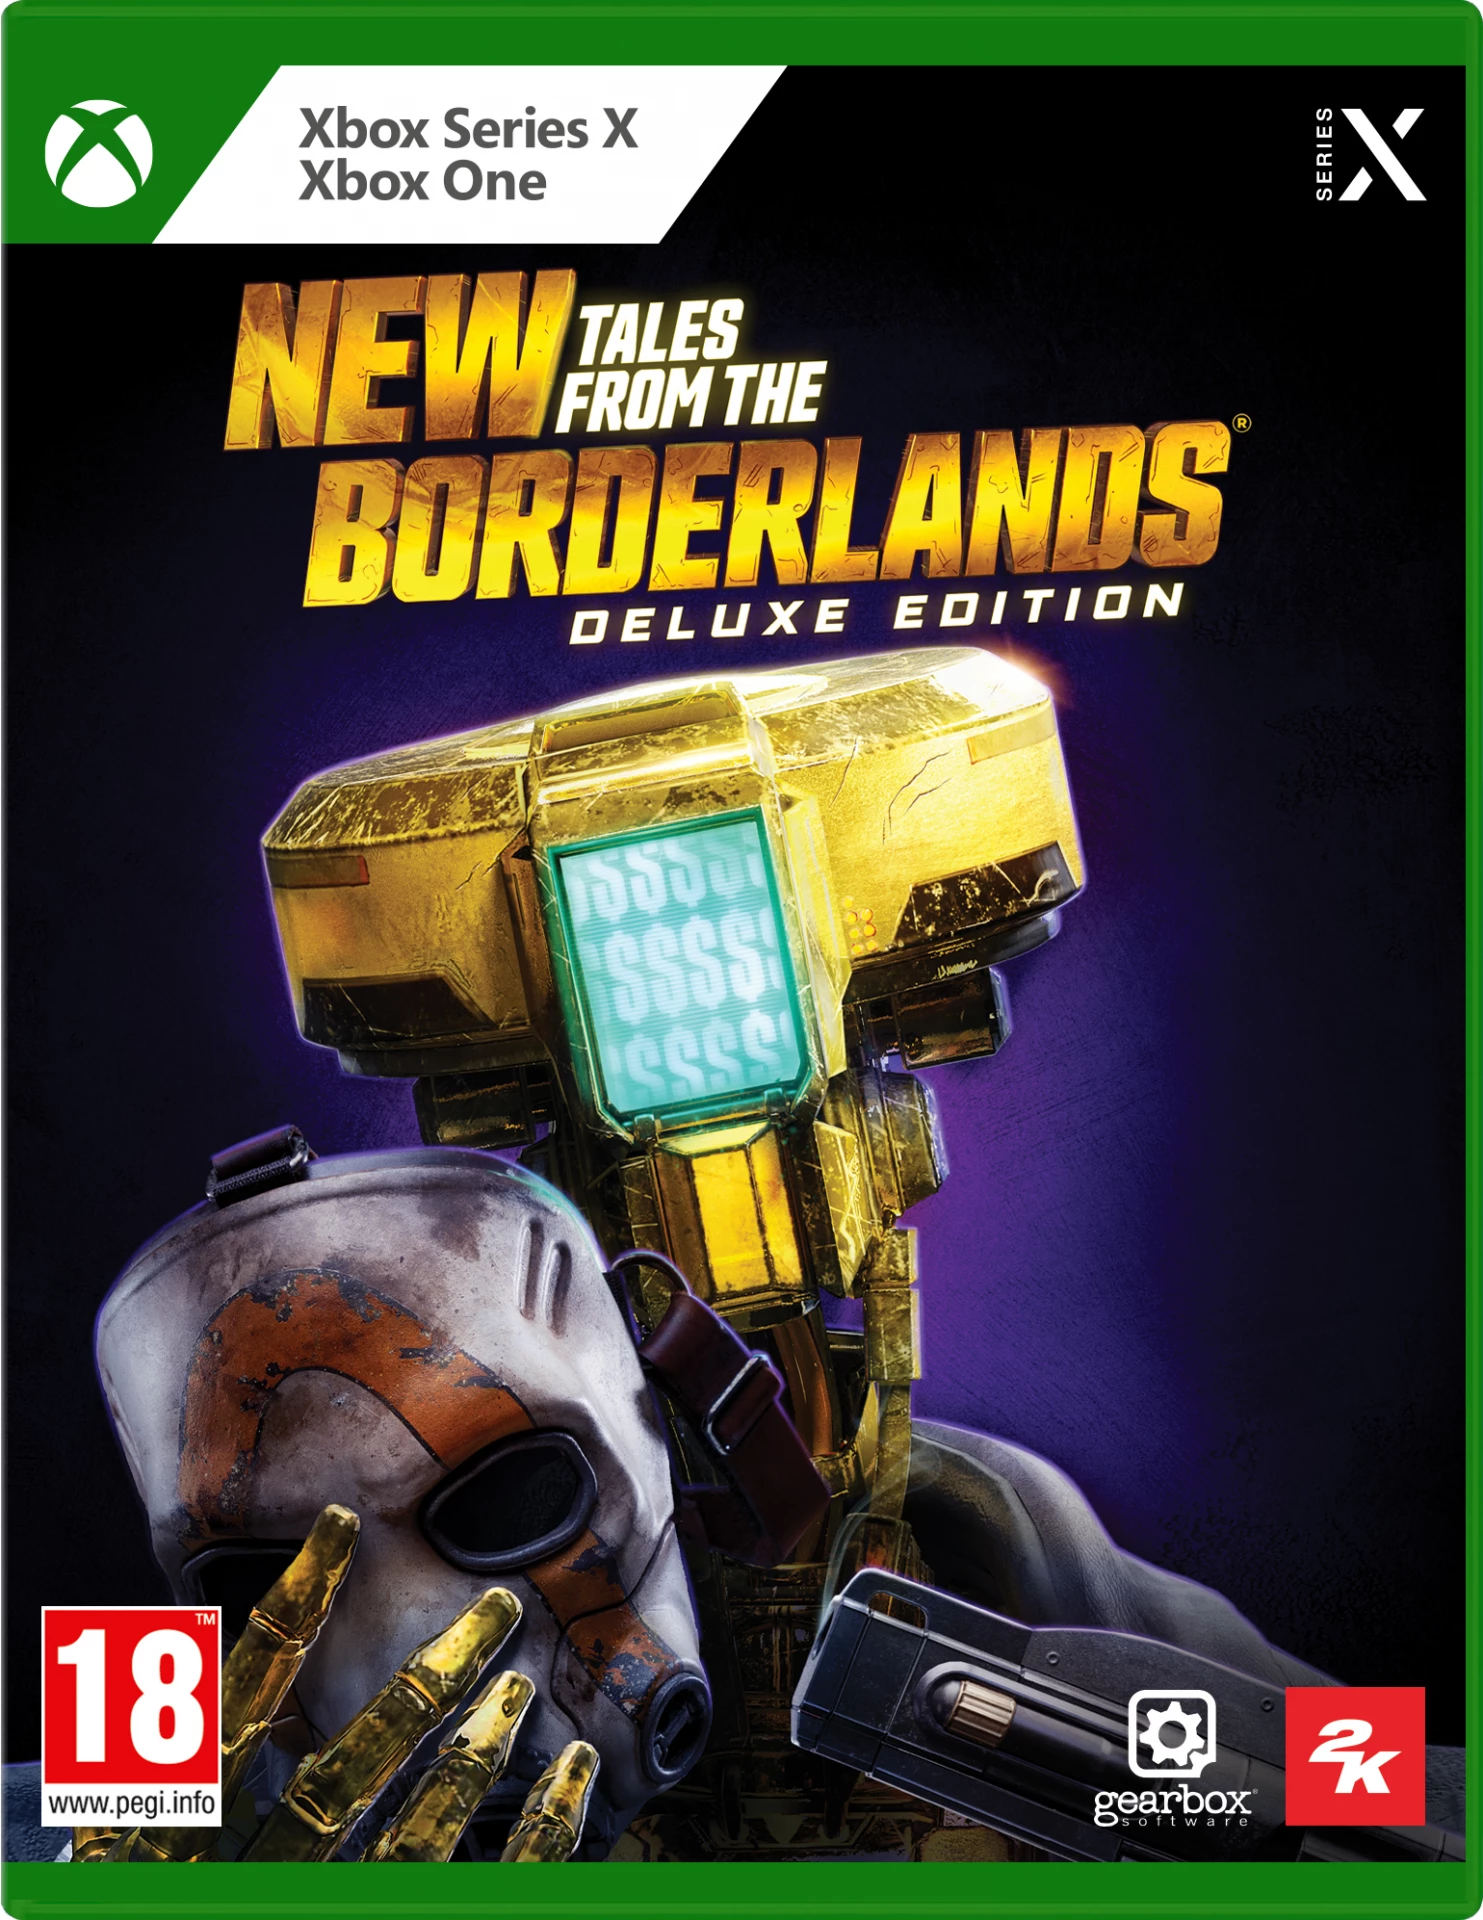 New Tales from the Borderlands - Deluxe Edition (Xbox One), Gearbox Entertainment